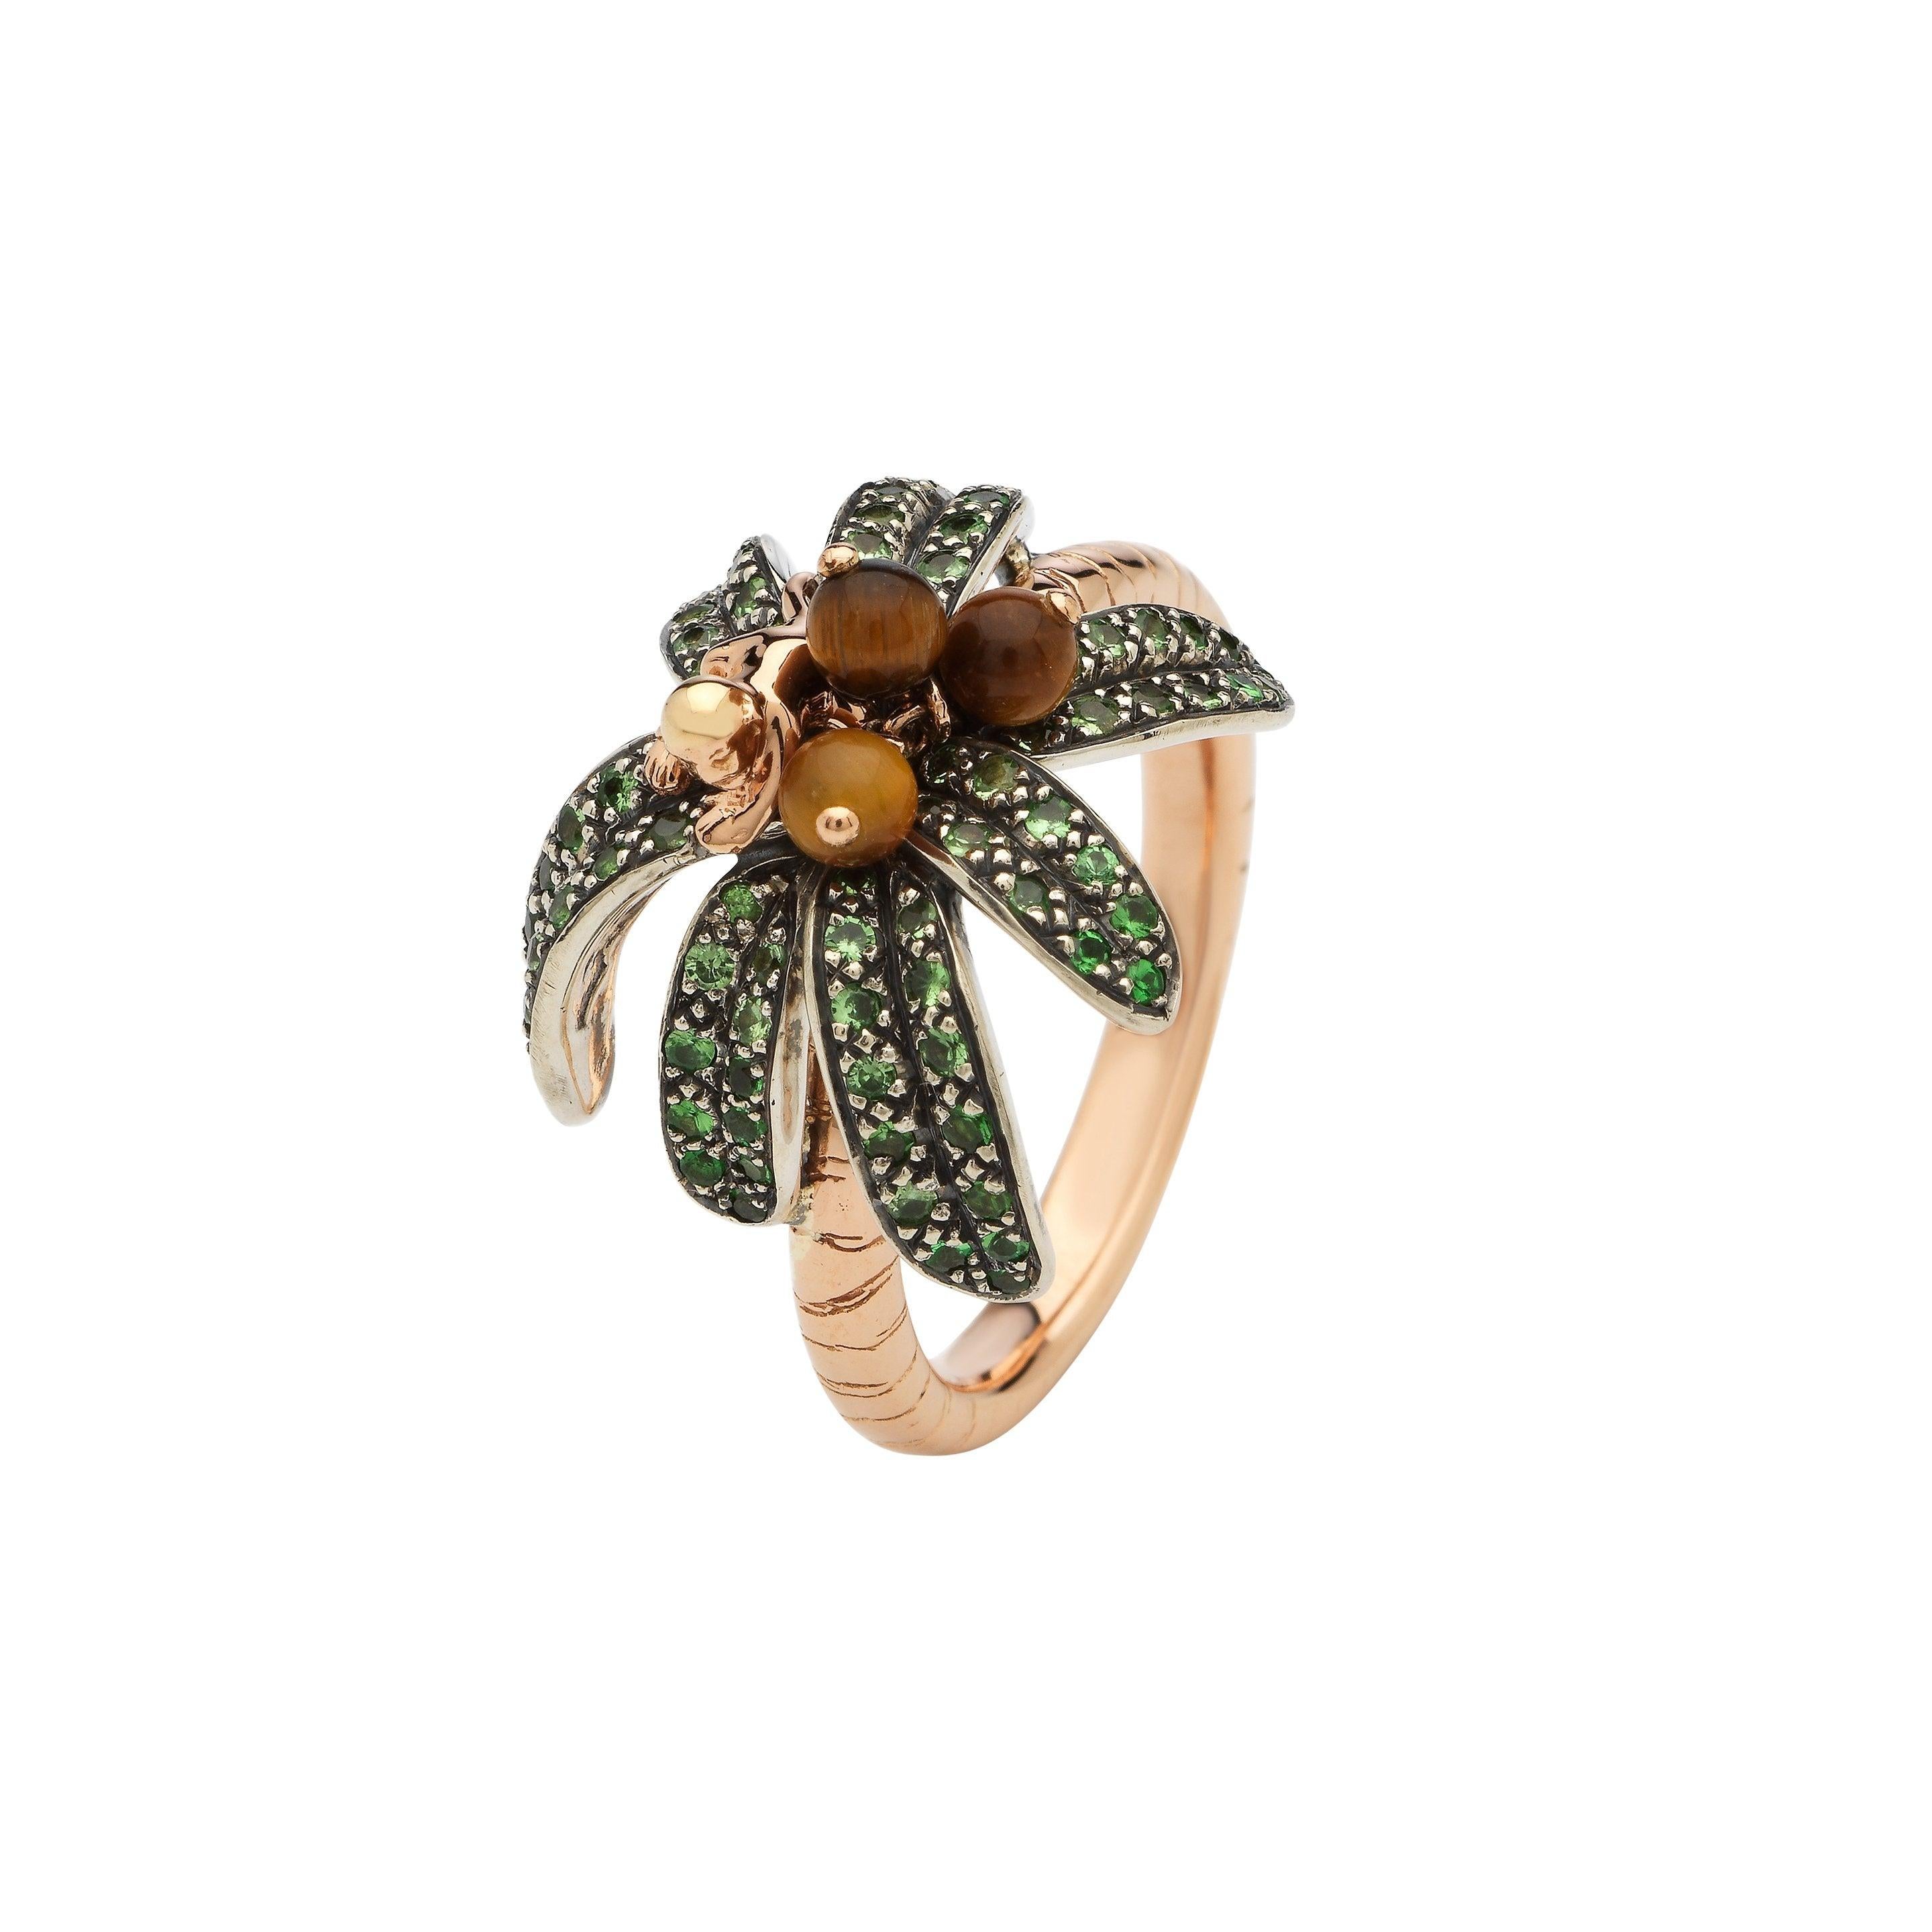 A baby monkey crafted from 18k rose gold clambers amid palm leaves embellished with green tsavorites on this 18k rose gold ring. With its band textured to evoke a palm tree’s trunk, tiger’s eye coconuts are also set on the ring, that gently move as